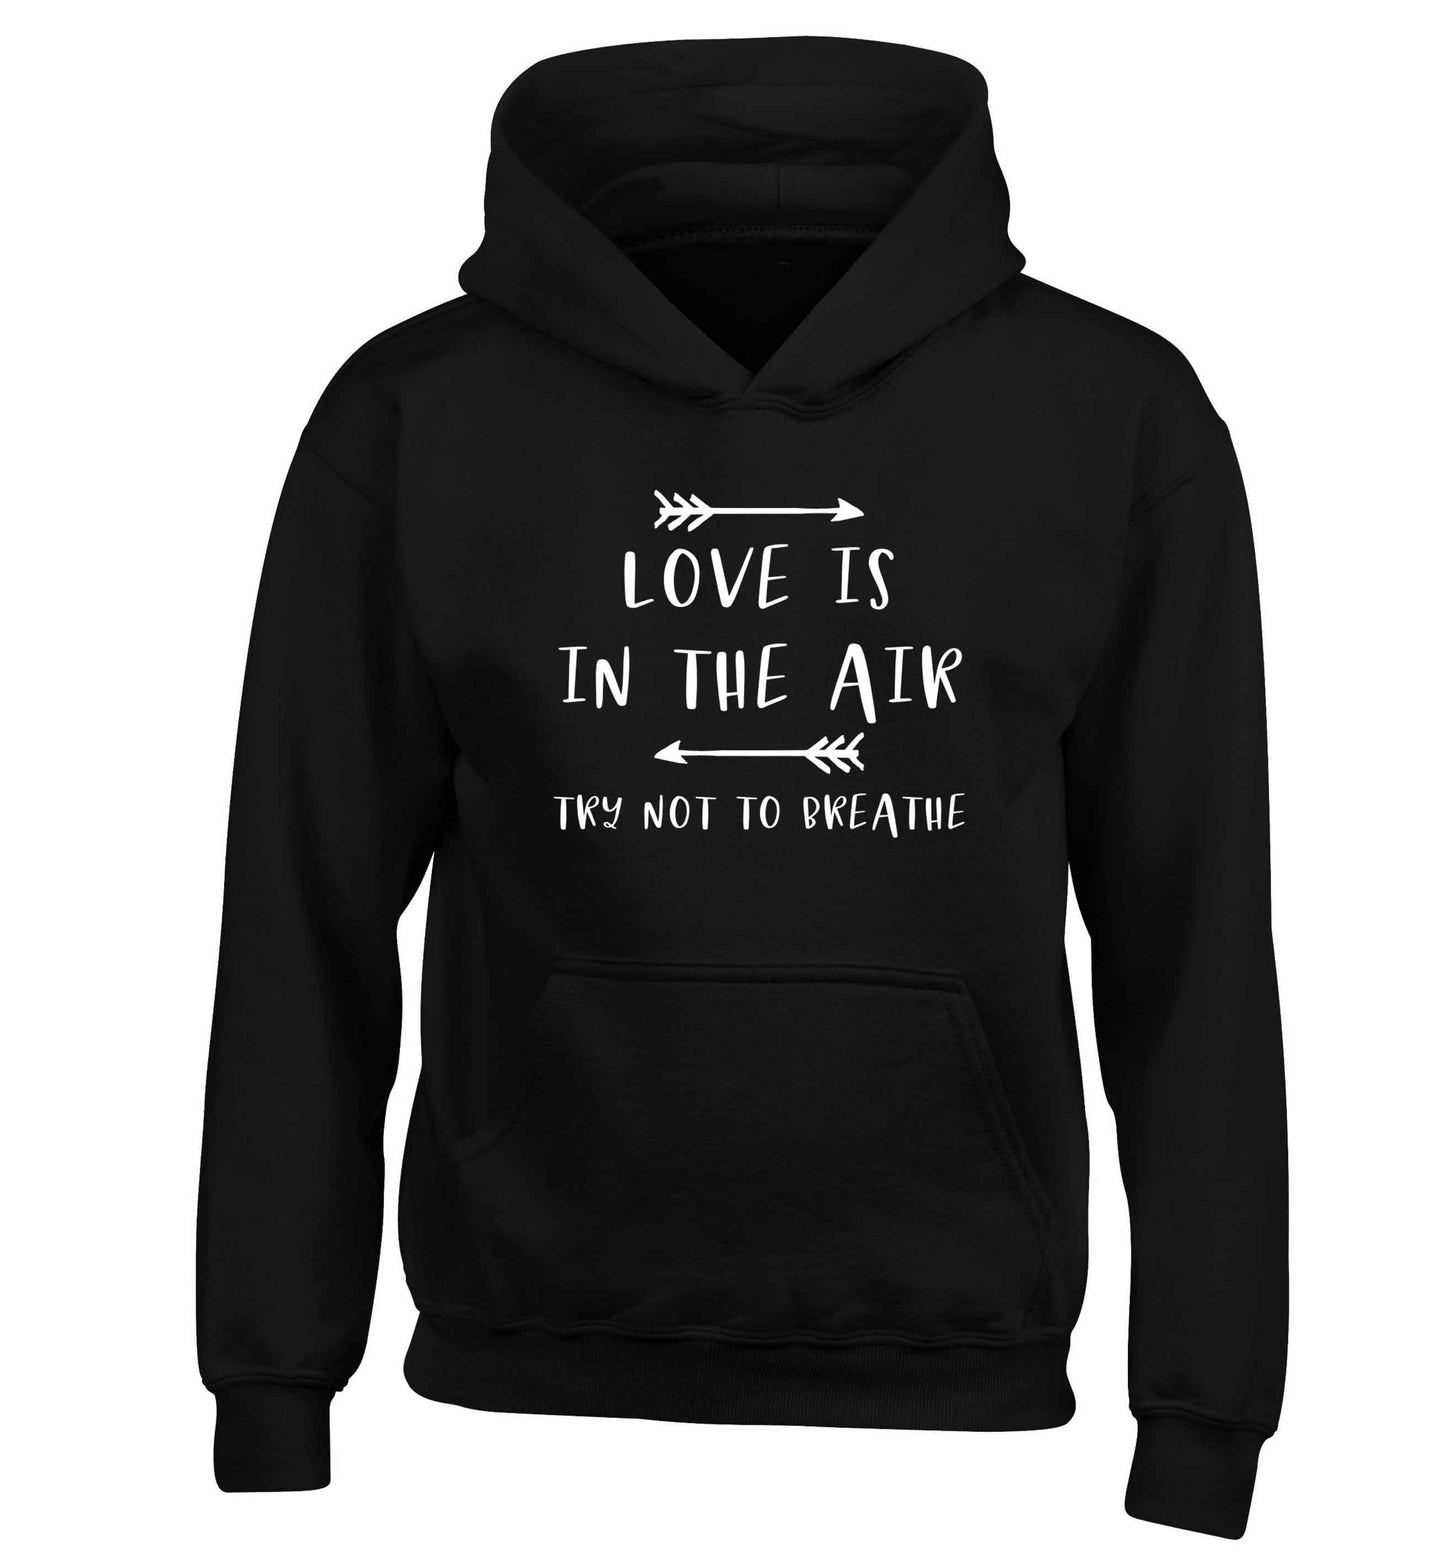 Love is in the air try not to breathe children's black hoodie 12-13 Years